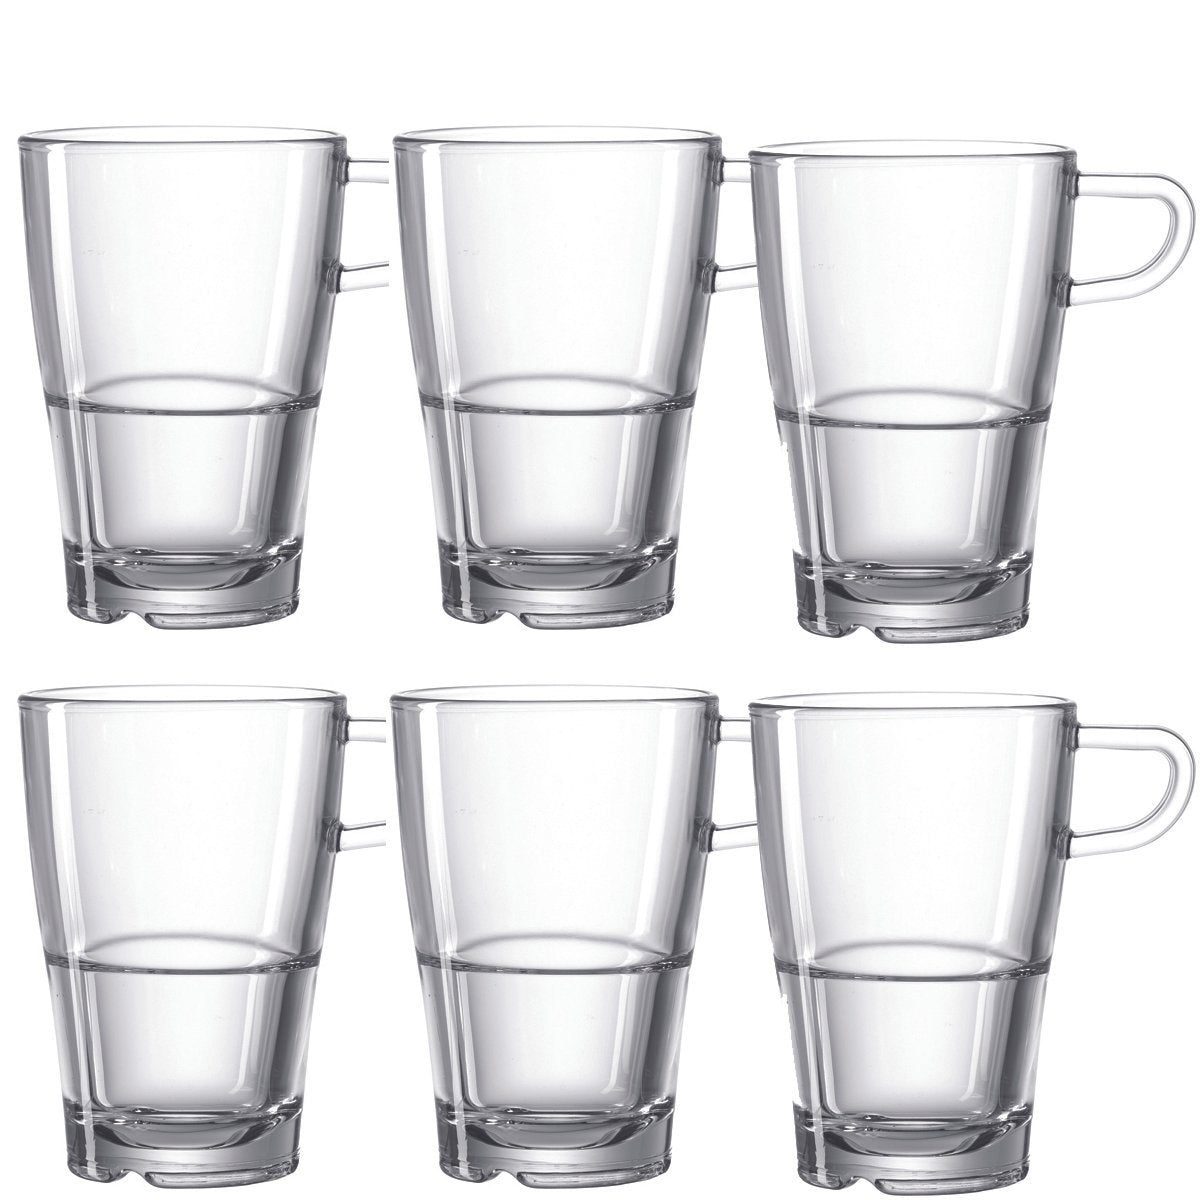 Leonardo SENSO Cup for Latte Coffee or Tea in Clear Glass 350ml - Set of 6